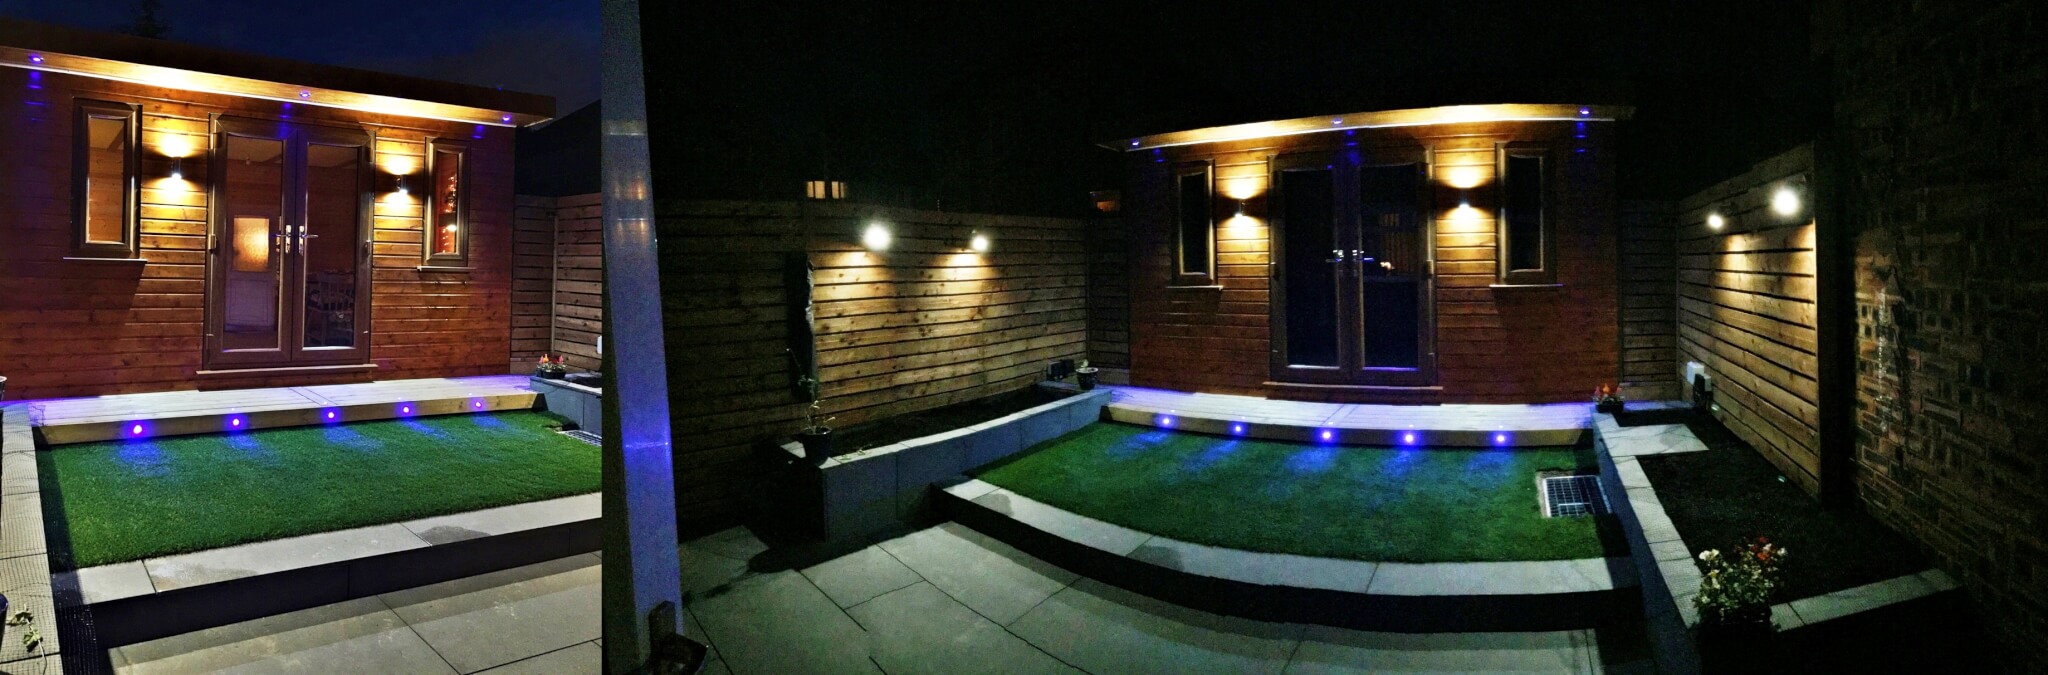 Garden rooms with lights